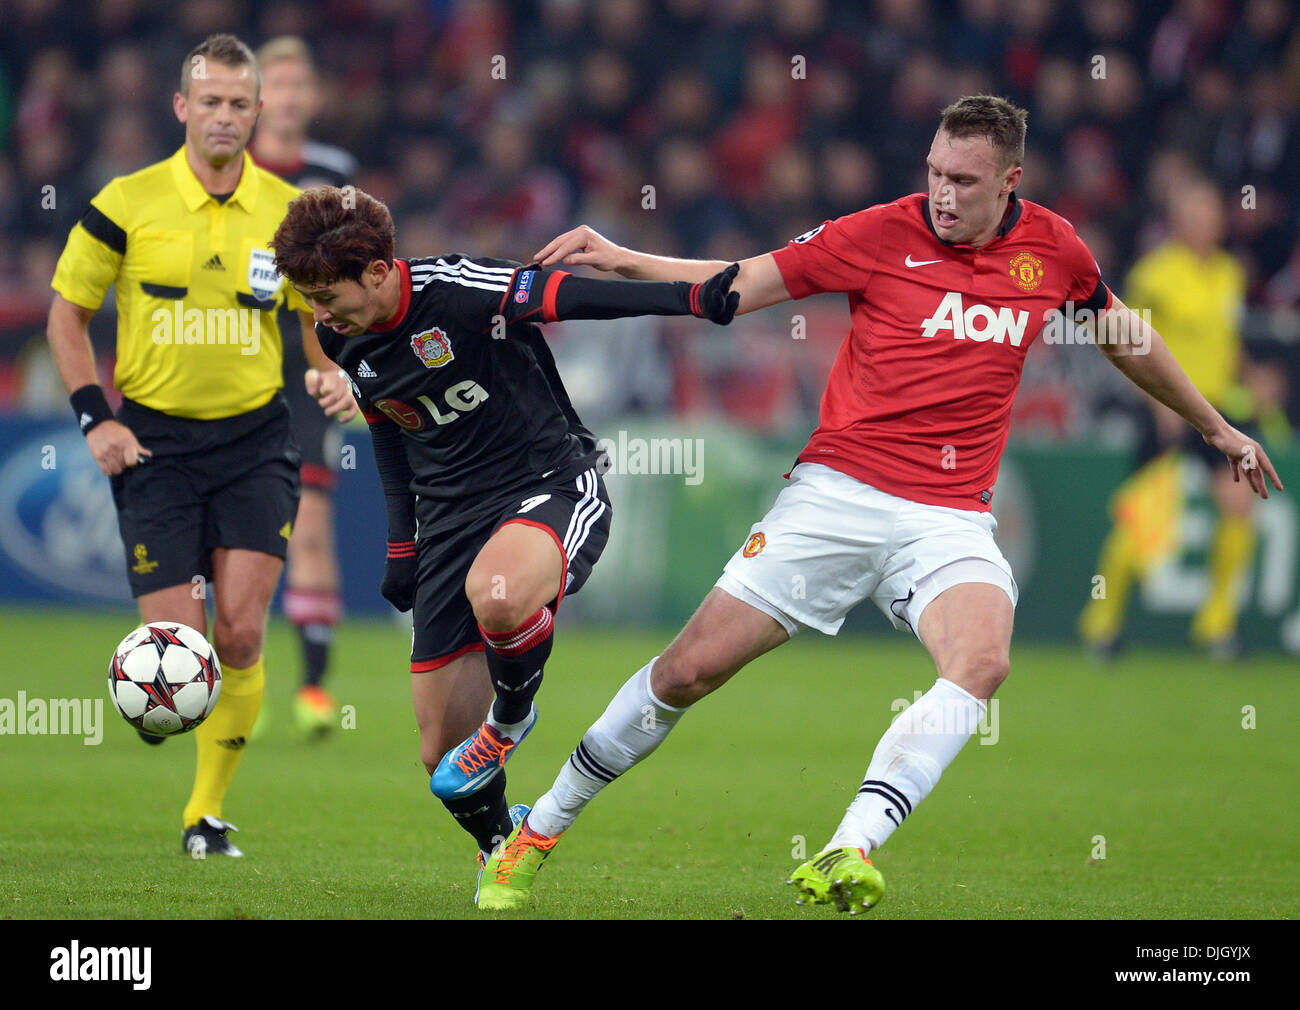 Leverkusen, Germany. 27th Nov, 2013. Leverkusen's Heung-Min Son (L) and Manchester's Phil Jones vie for the ball during the Champions League soccer match between Bayer 04 Leverkusen and Manchester United in the BayArena in Leverkusen, Germany, 27 November 2013. Photo: Frederico Gambarini/dpa/Alamy Live News Stock Photo